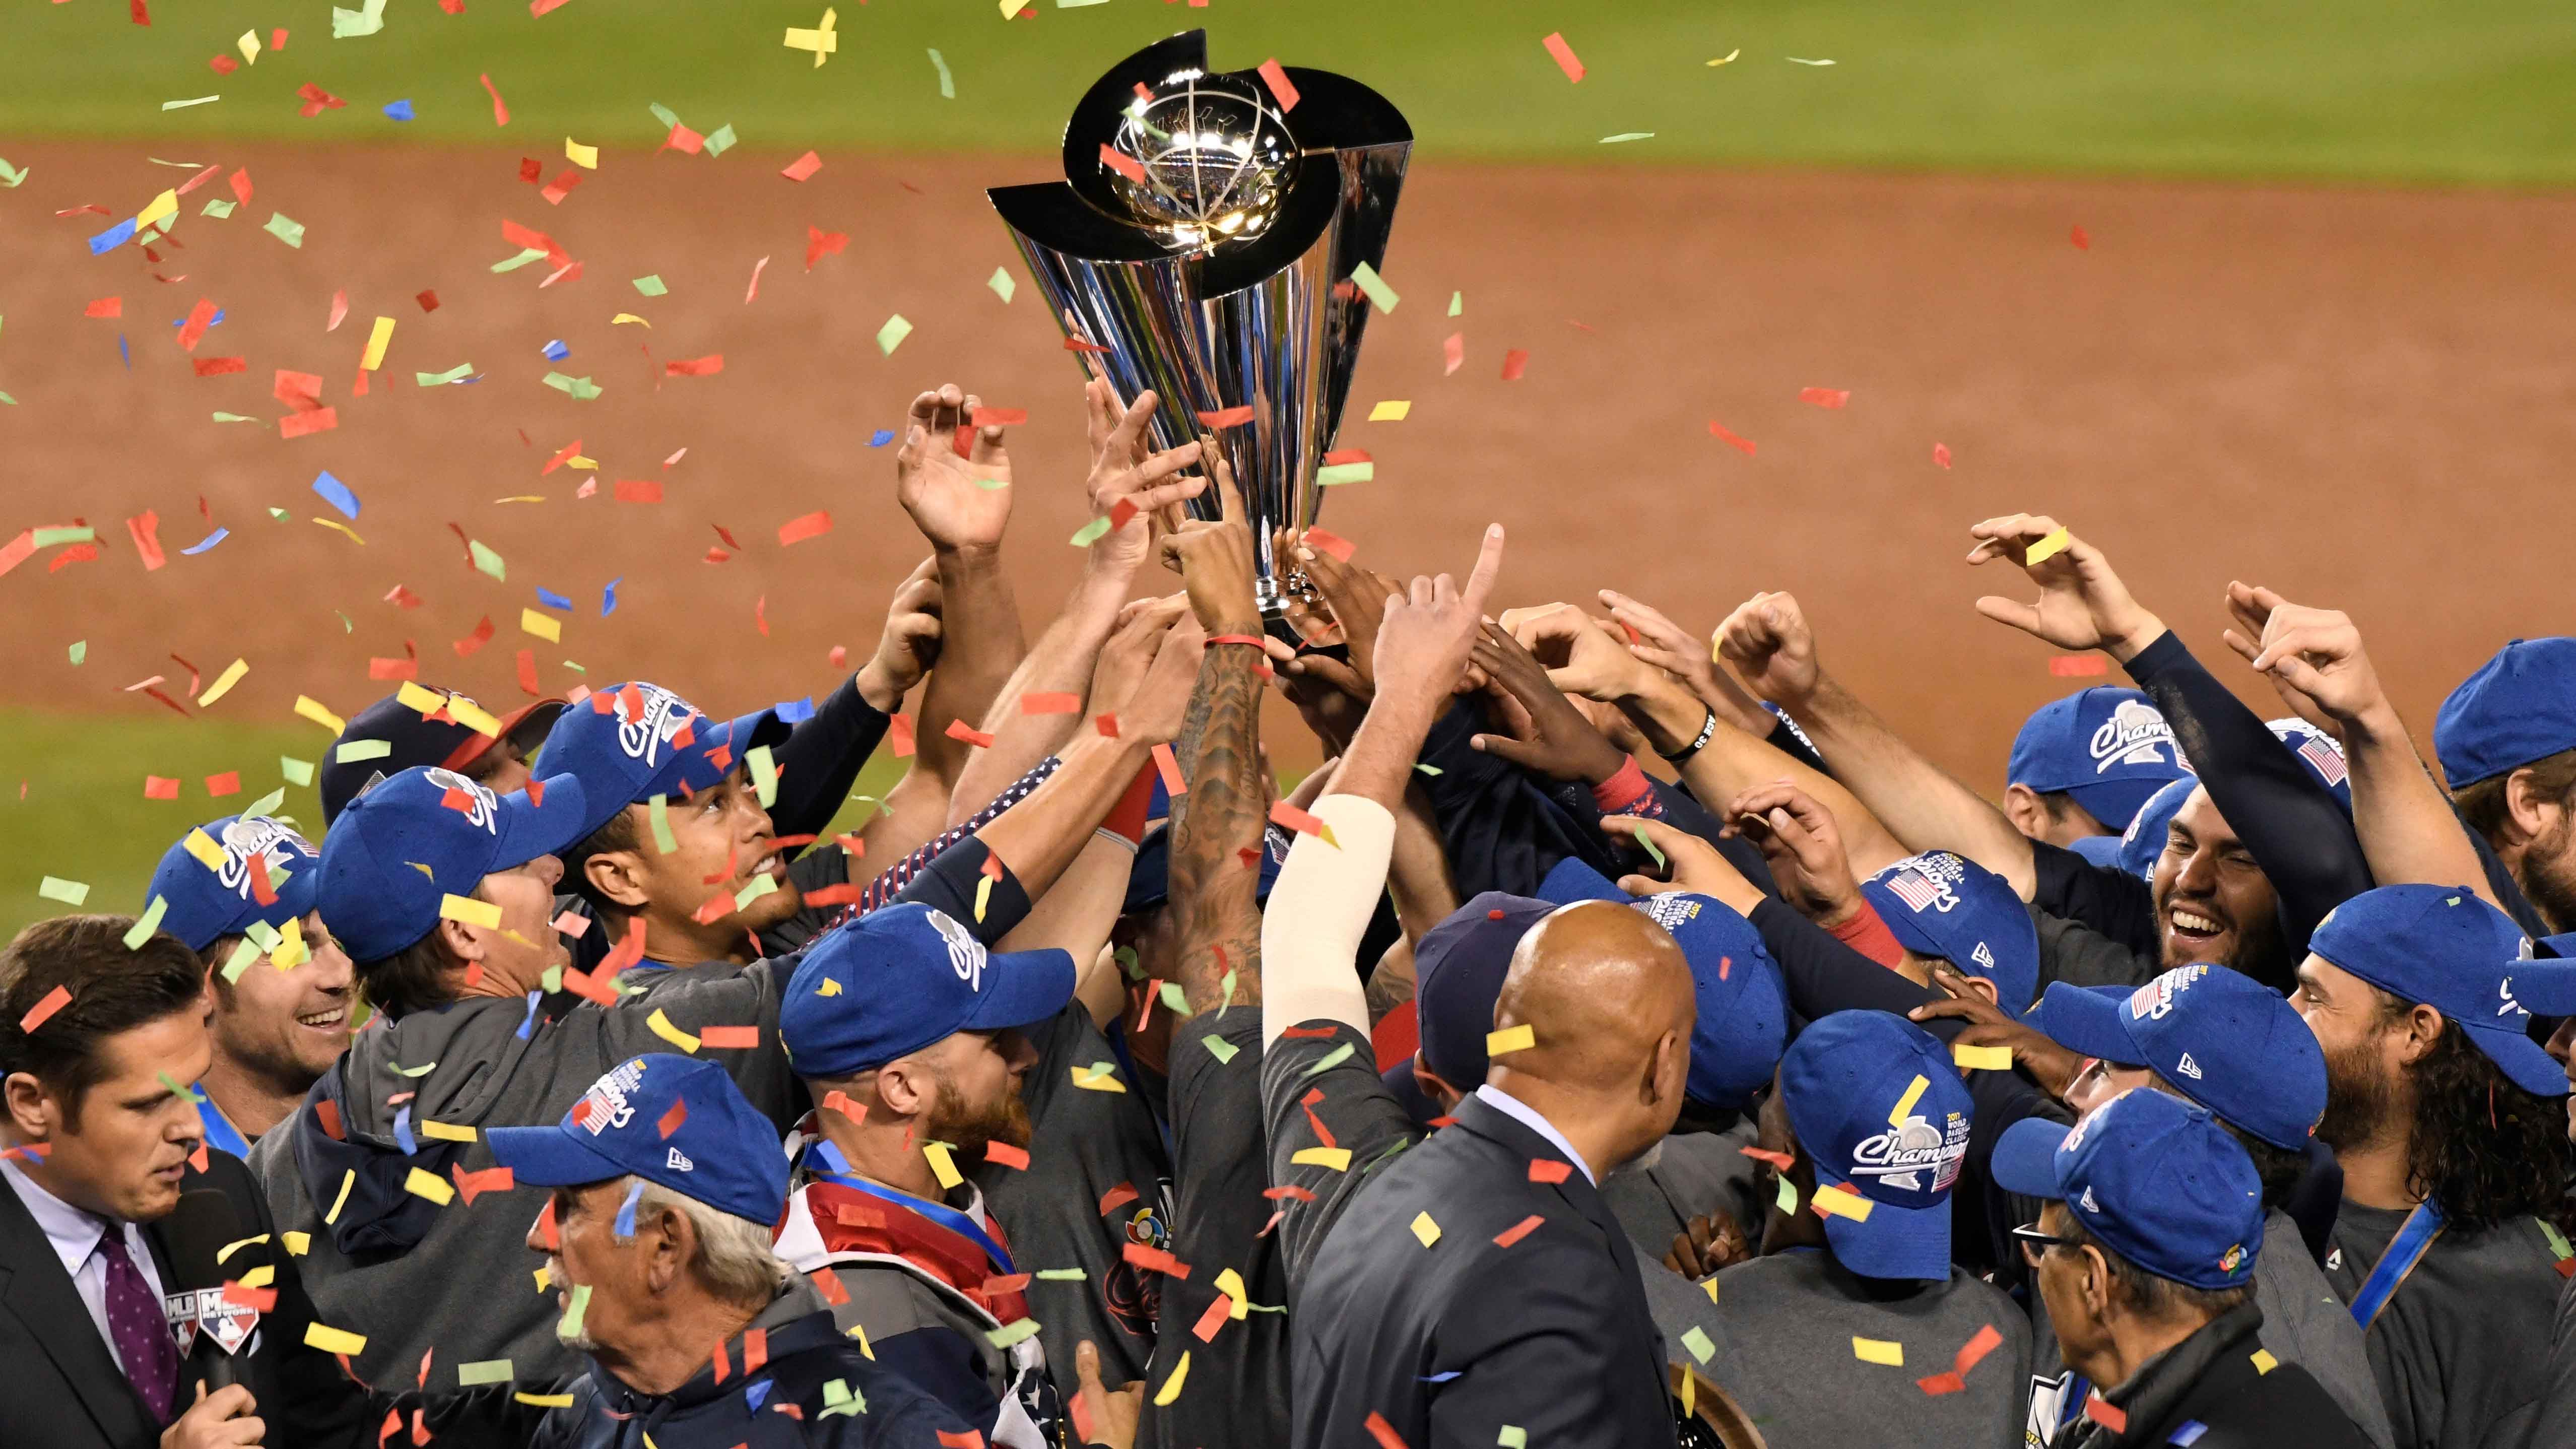 Mexico vs. Great Britain FREE LIVE STREAM (3/15/23): Watch World Baseball  Classic 2023 online